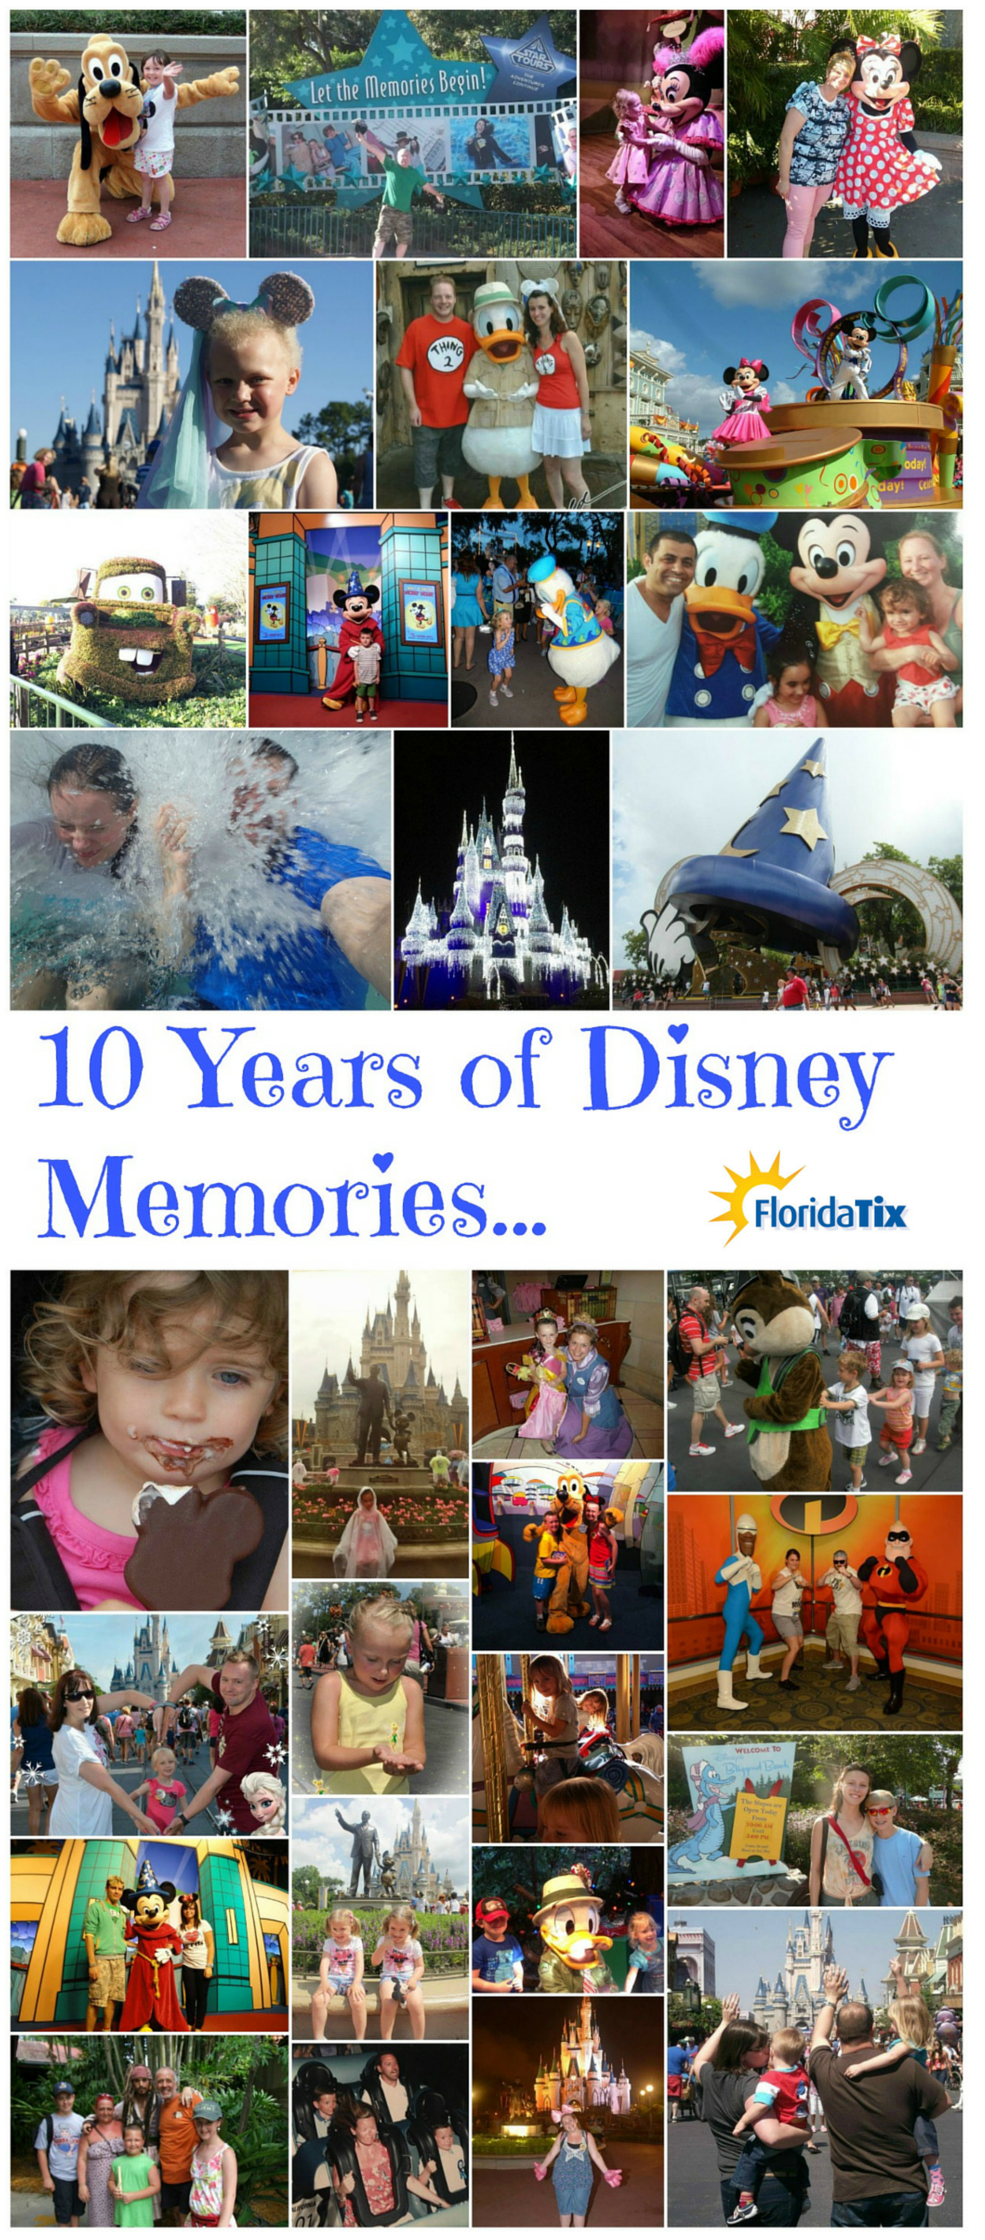 Disney World in pictures from the past 10 years